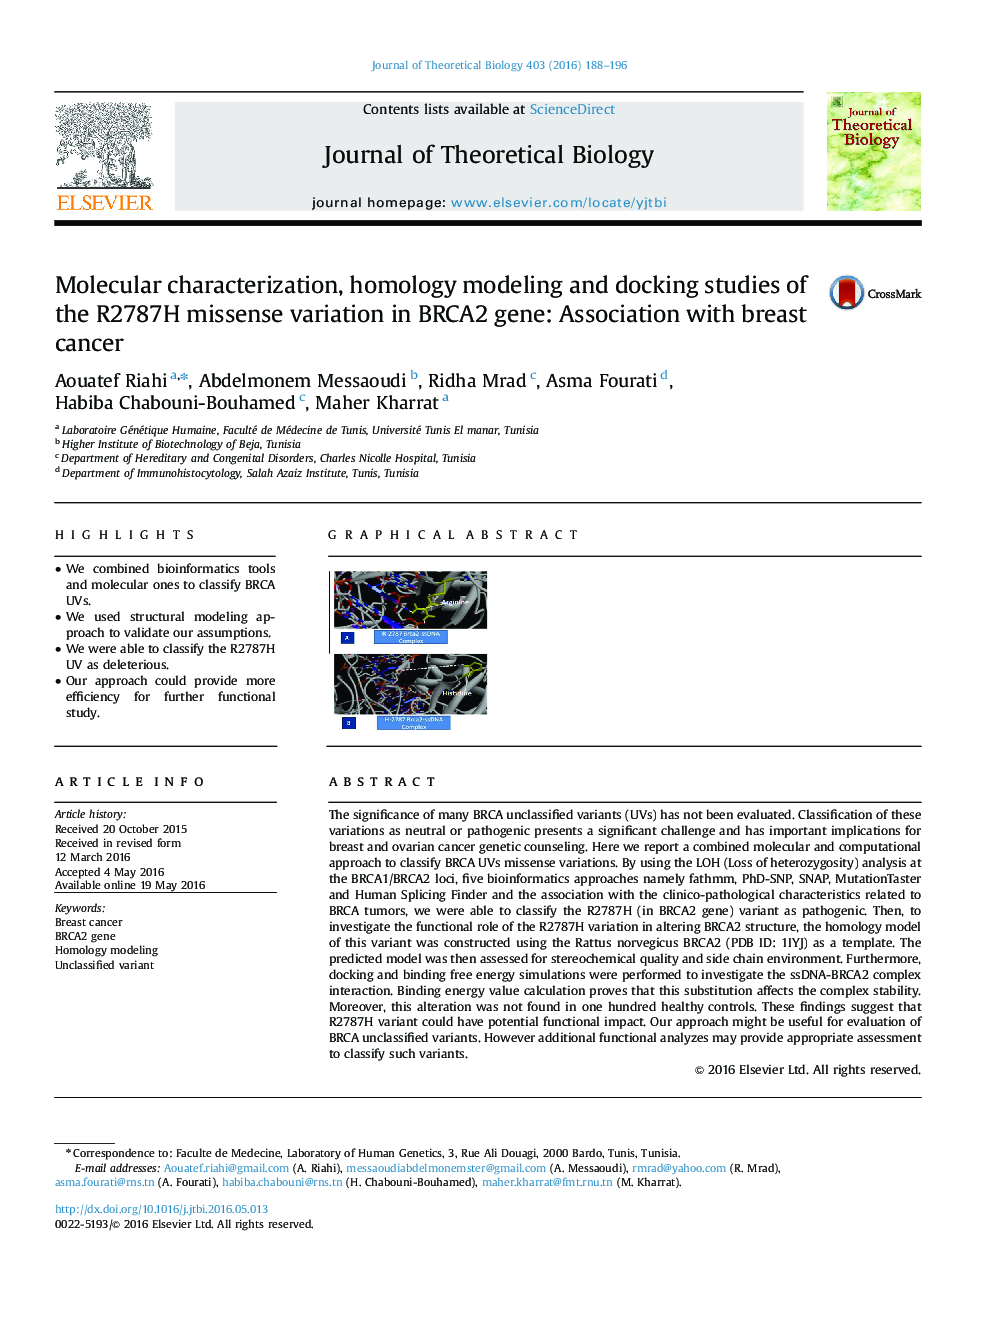 Molecular characterization, homology modeling and docking studies of the R2787H missense variation in BRCA2 gene: Association with breast cancer